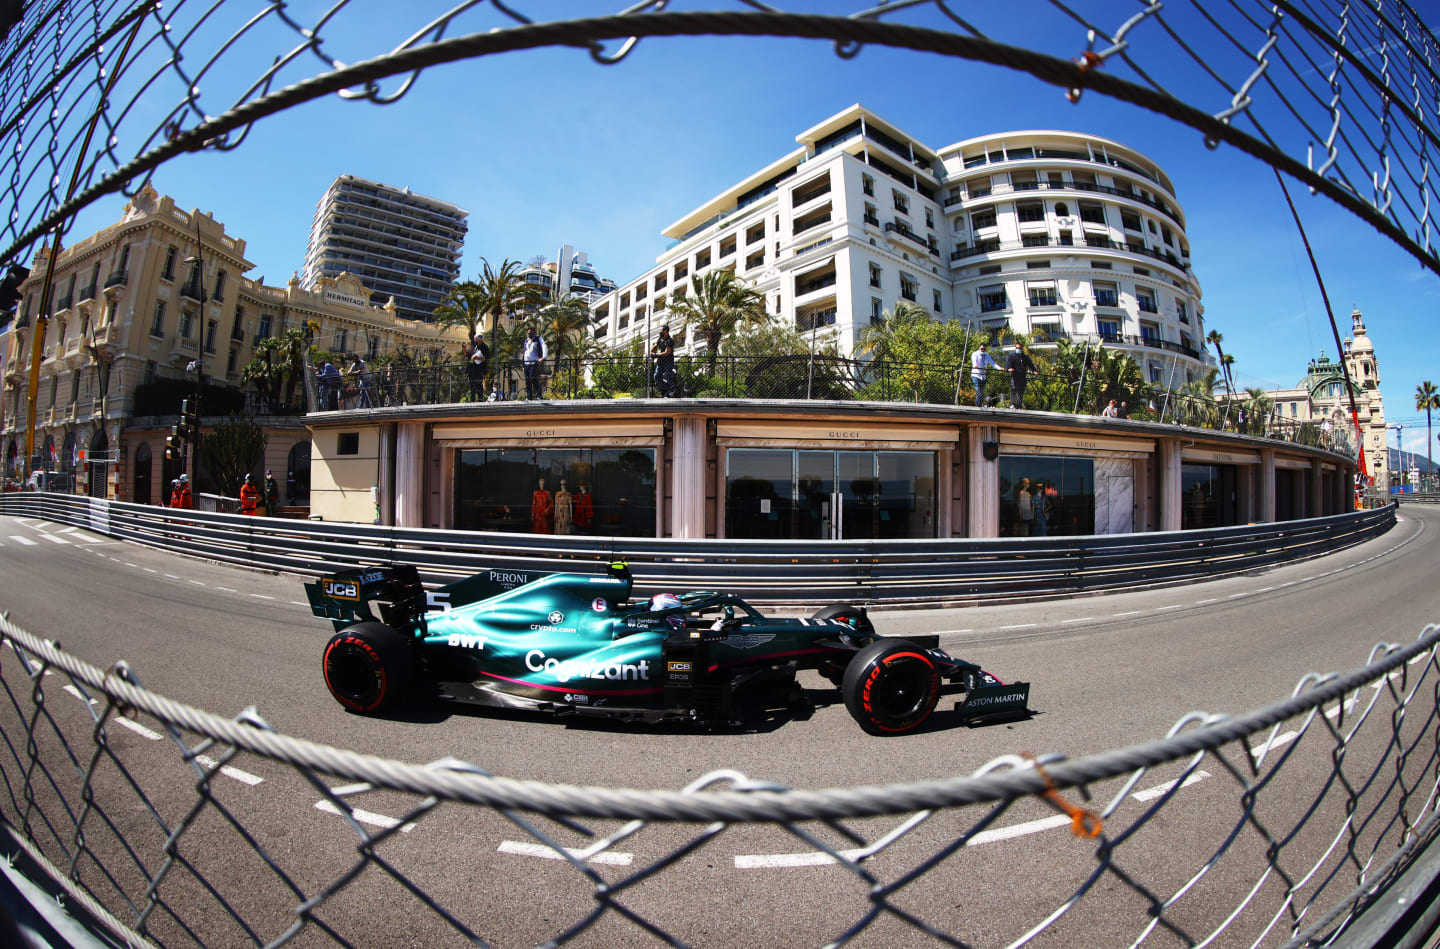 MONTE-CARLO, MONACO - MAY 20: Sebastian Vettel of Germany driving the (5) Aston Martin AMR21 Mercedes on track during practice ahead of the F1 Grand Prix of Monaco at Circuit de Monaco on May 20, 2021 in Monte-Carlo, Monaco. (Photo by Bryn Lennon/Getty Images)